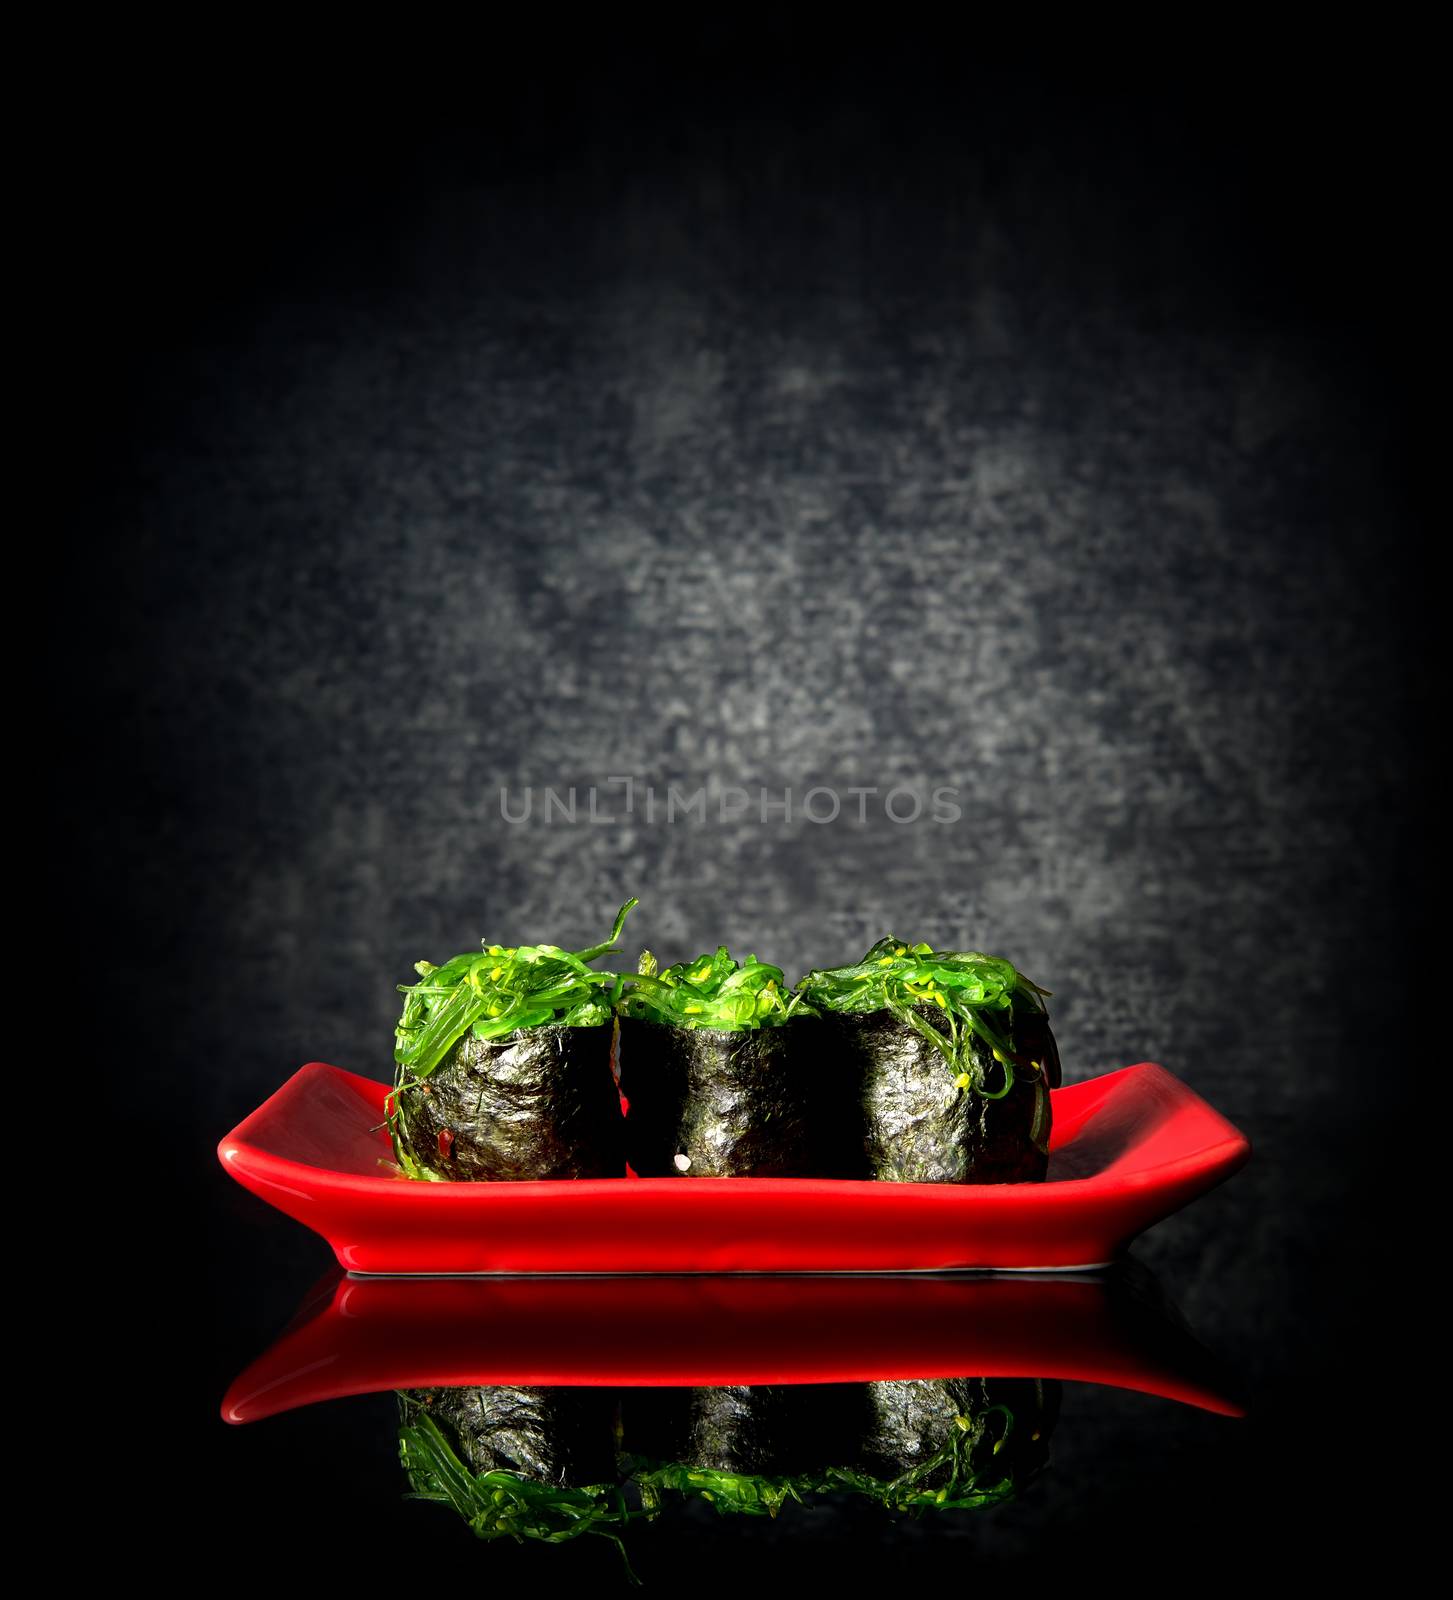 Spicy sushi on red plate and black background